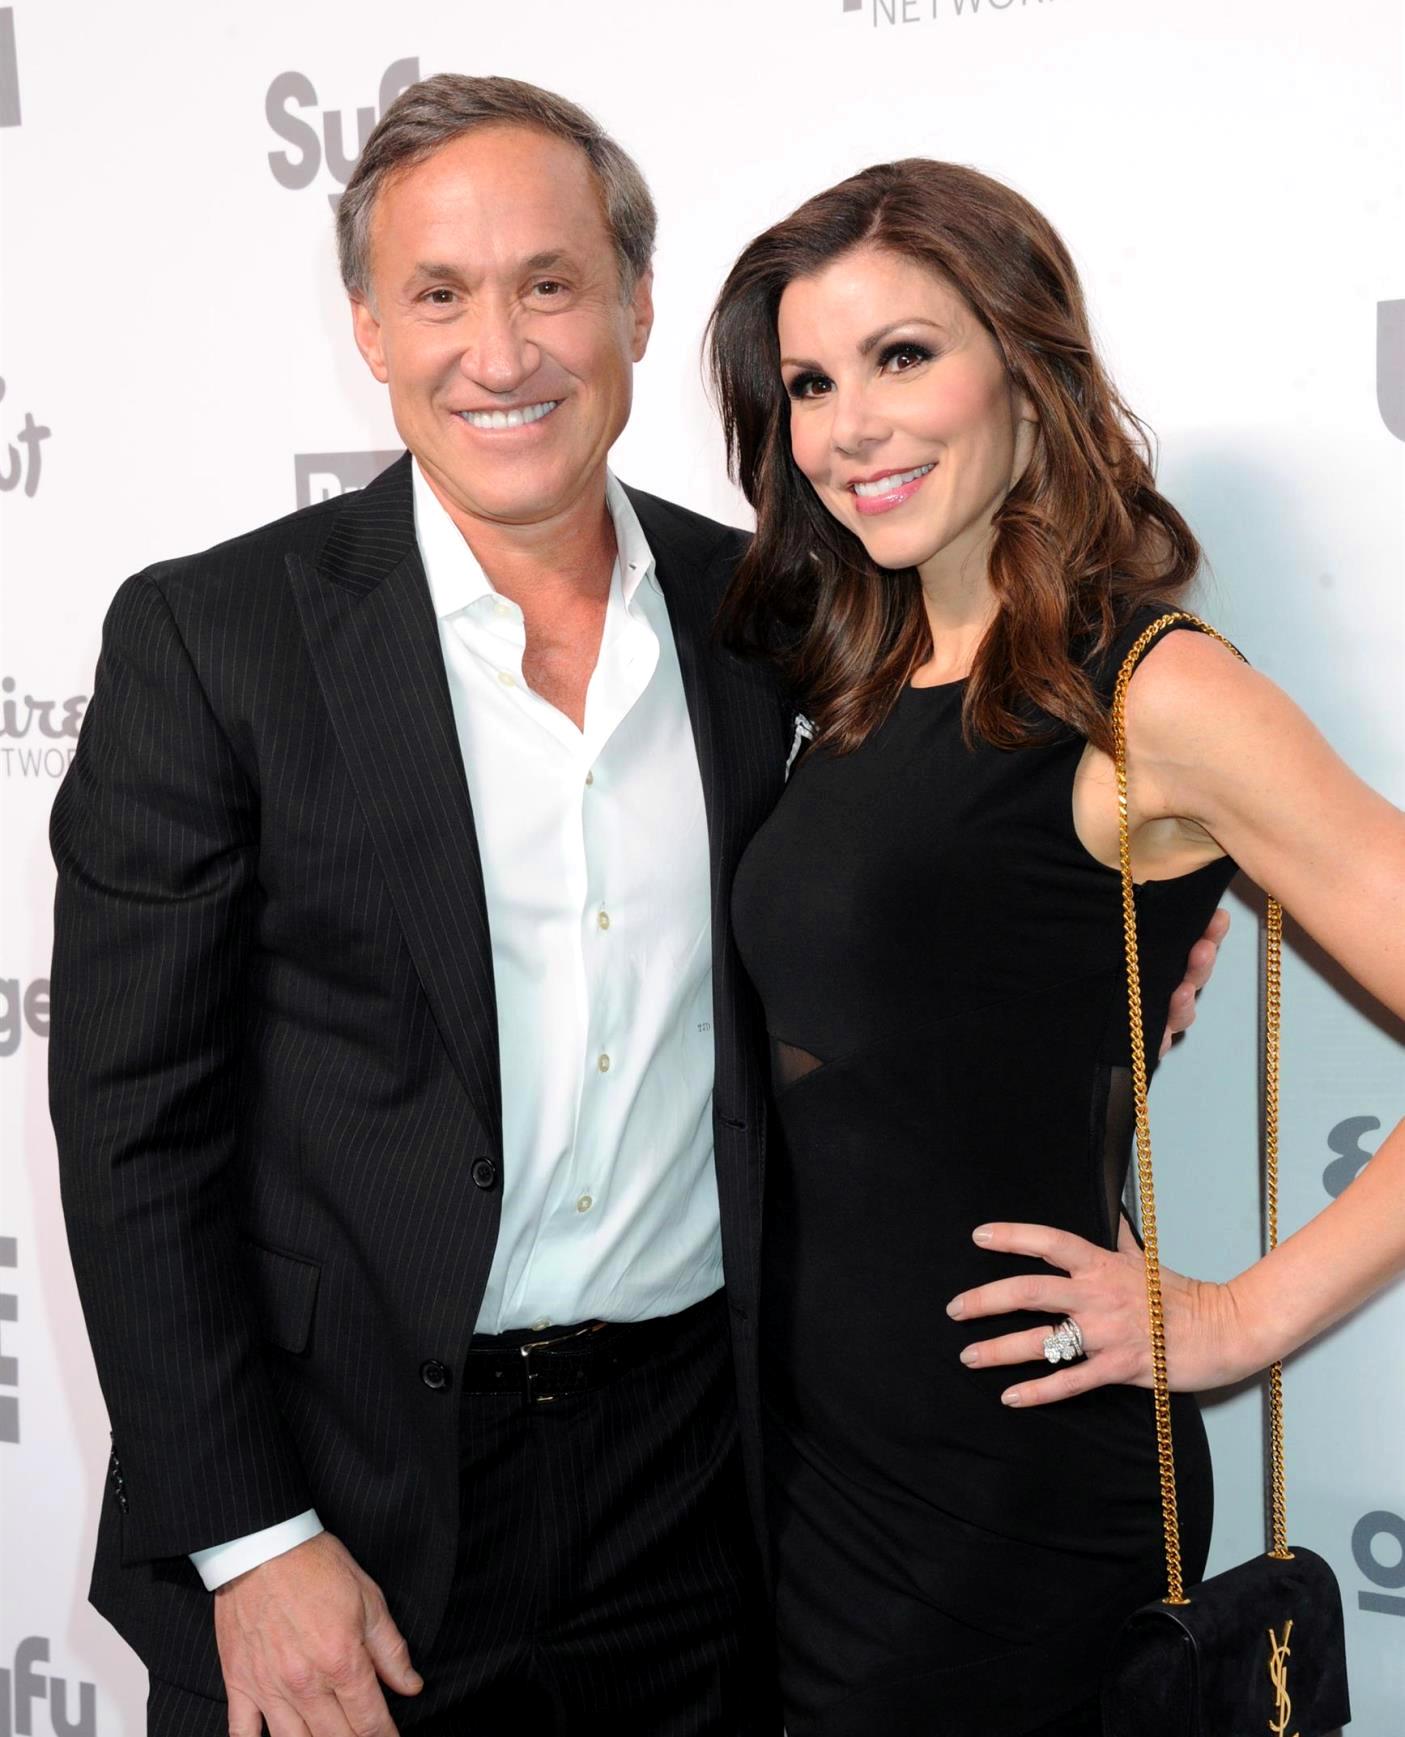 Dr. Terry Dubrow Accused of Botched surgery in Lawsuit